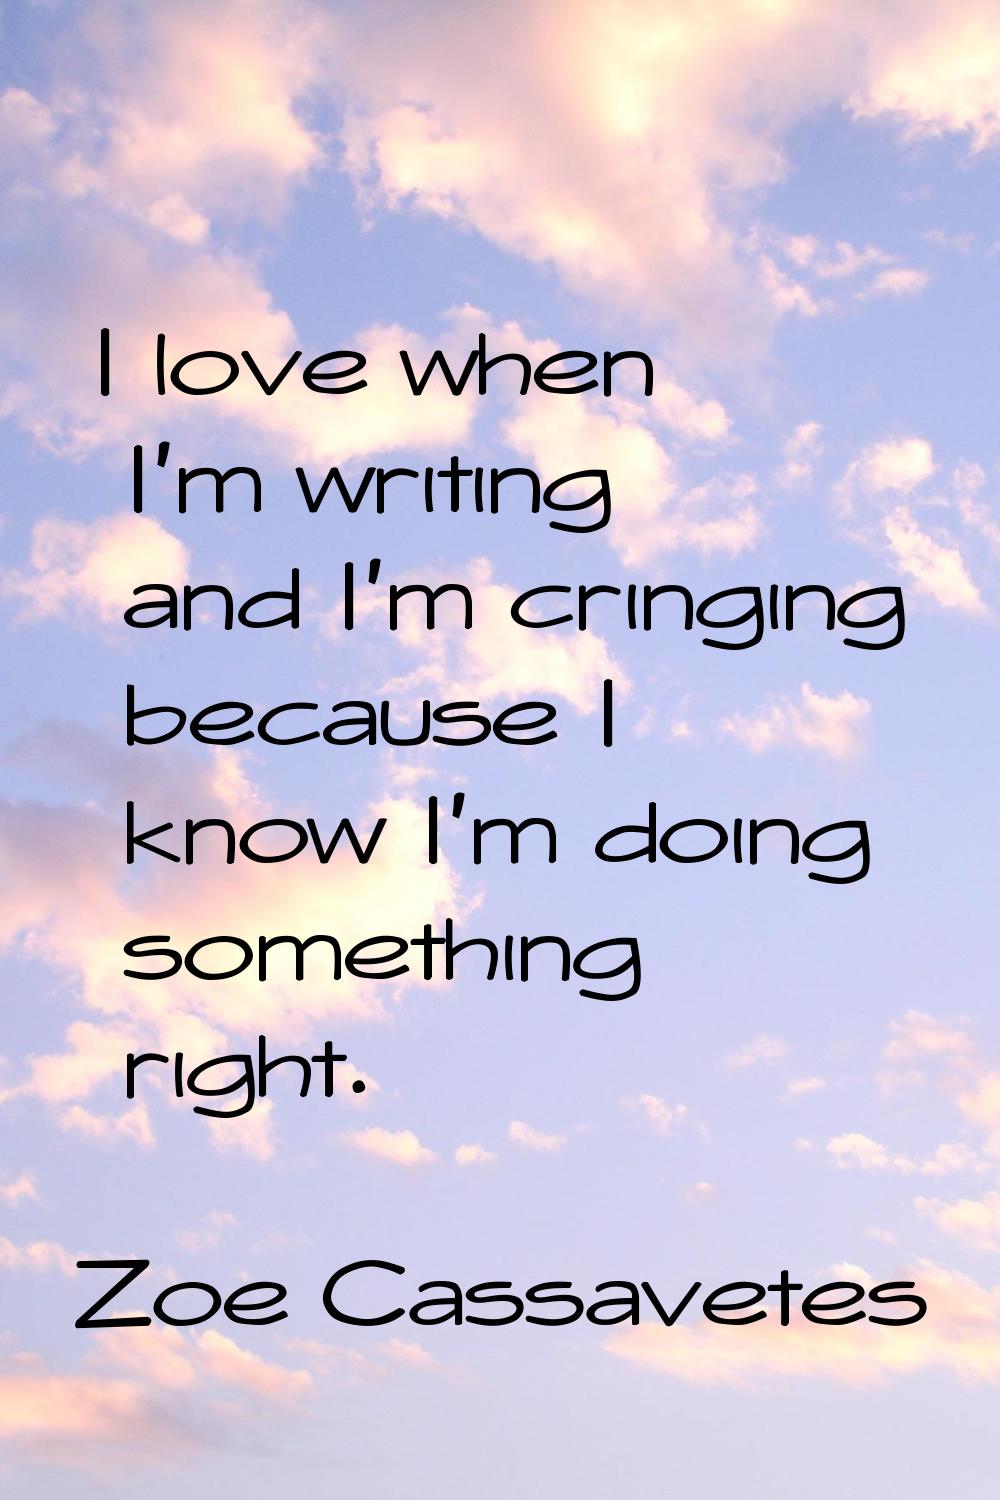 I love when I'm writing and I'm cringing because I know I'm doing something right.